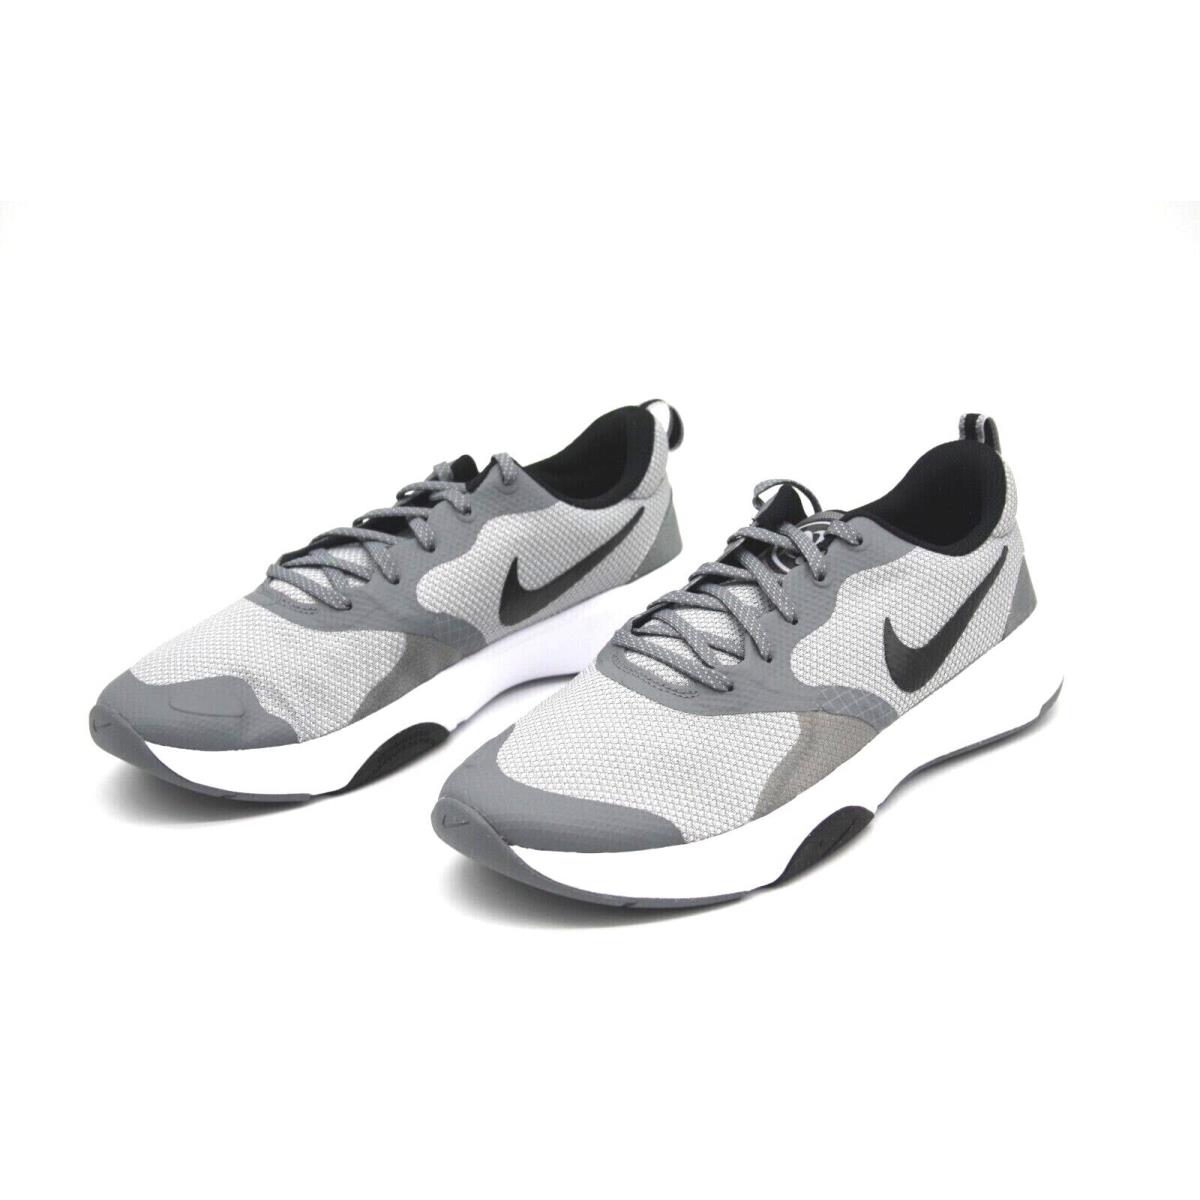 Nike shoes City Rep - Wolf Grey/Cool Grey/White/Black 2